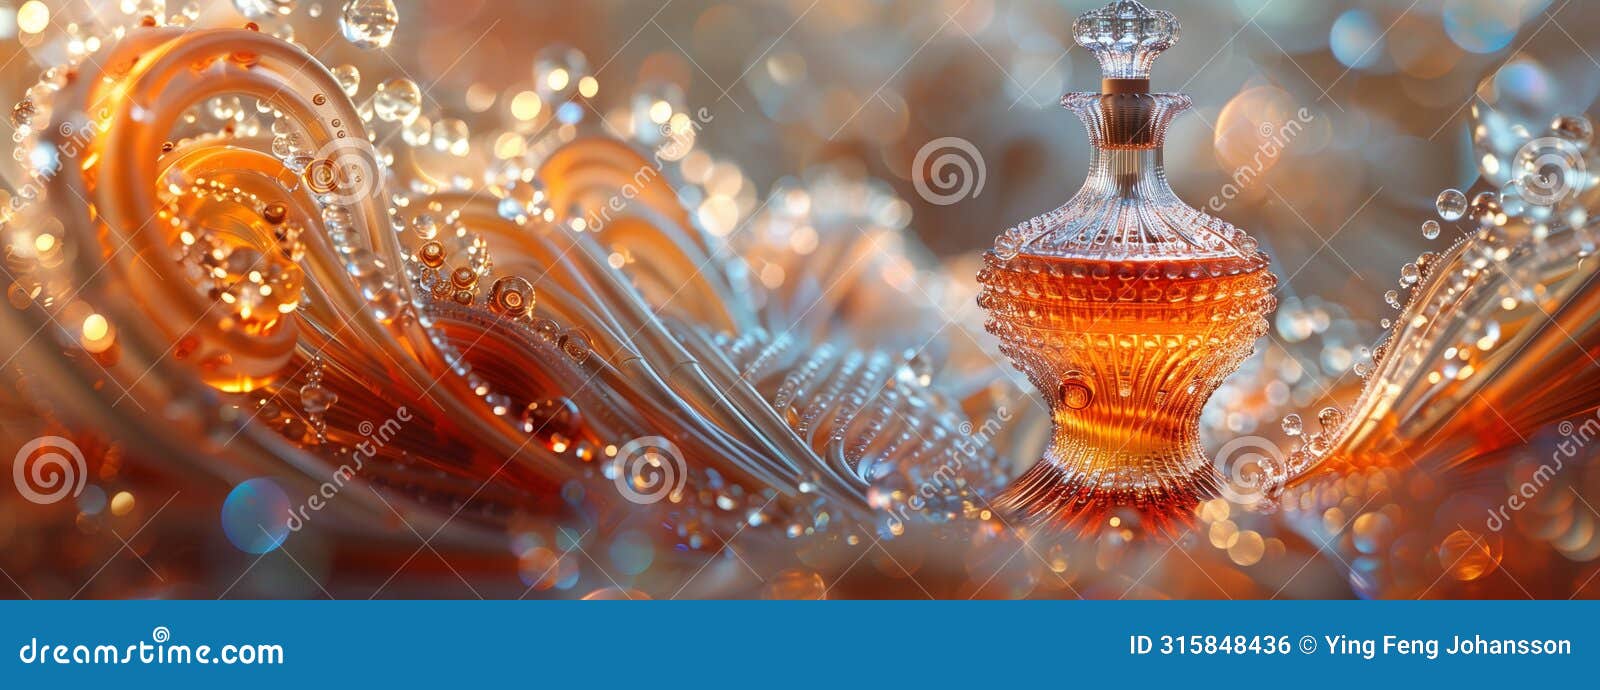 witness the convergence of art and impossibility: a crystal carafe showcase an intricate fractal .